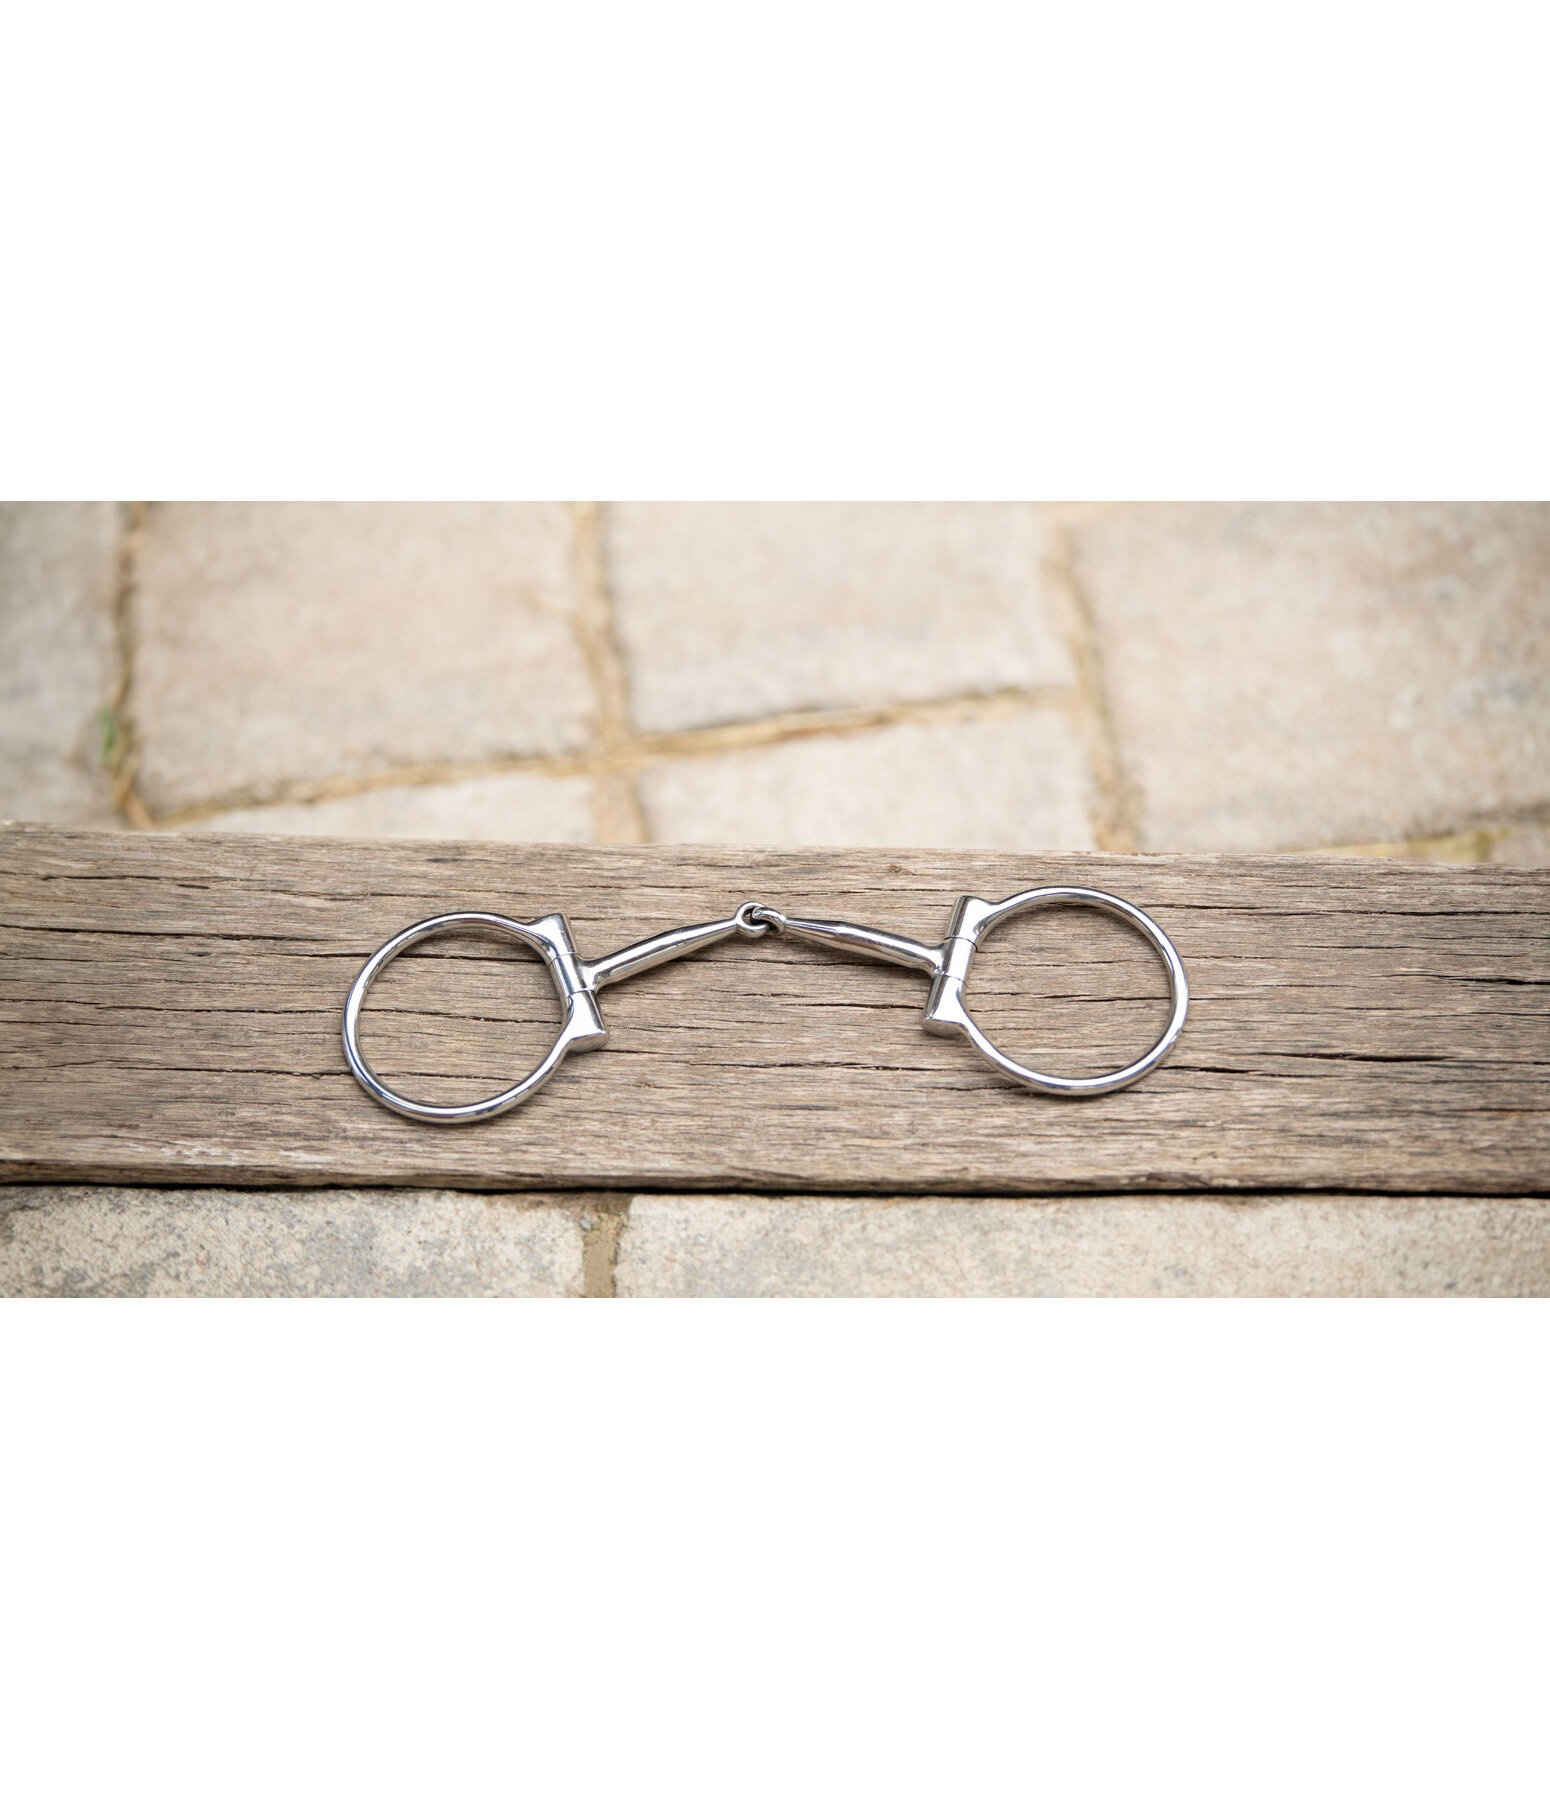 Mors  anneaux  Stainless Steel Offset Dee Snaffle